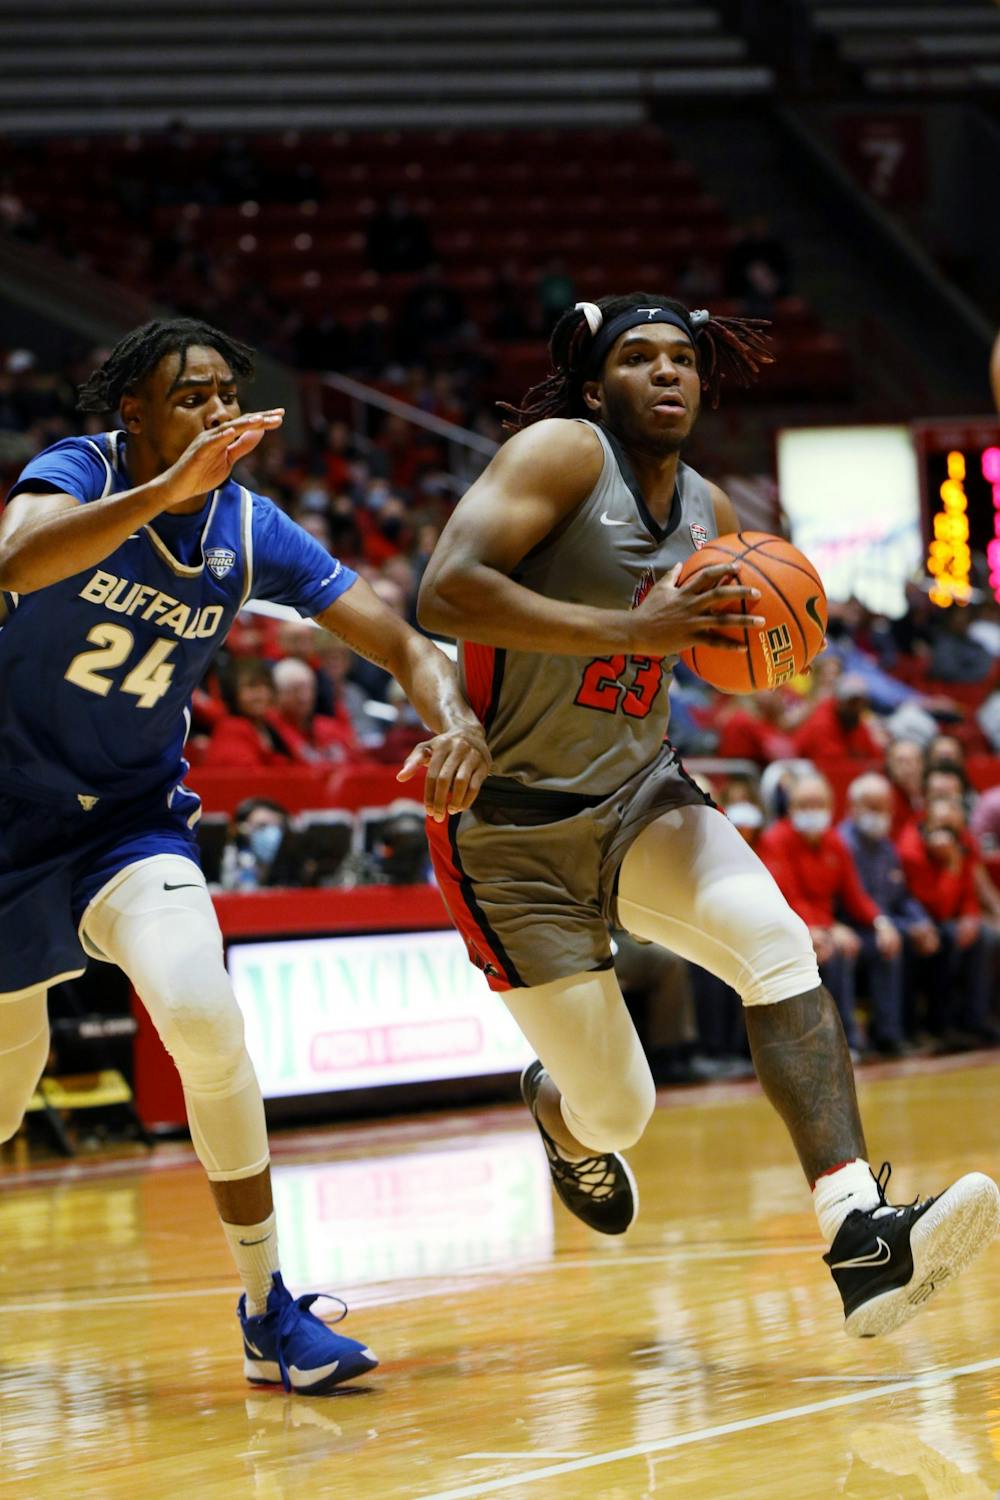 Ball State drops 2nd consecutive game in loss to Buffalo, Cardinals believe they are headed in right direction